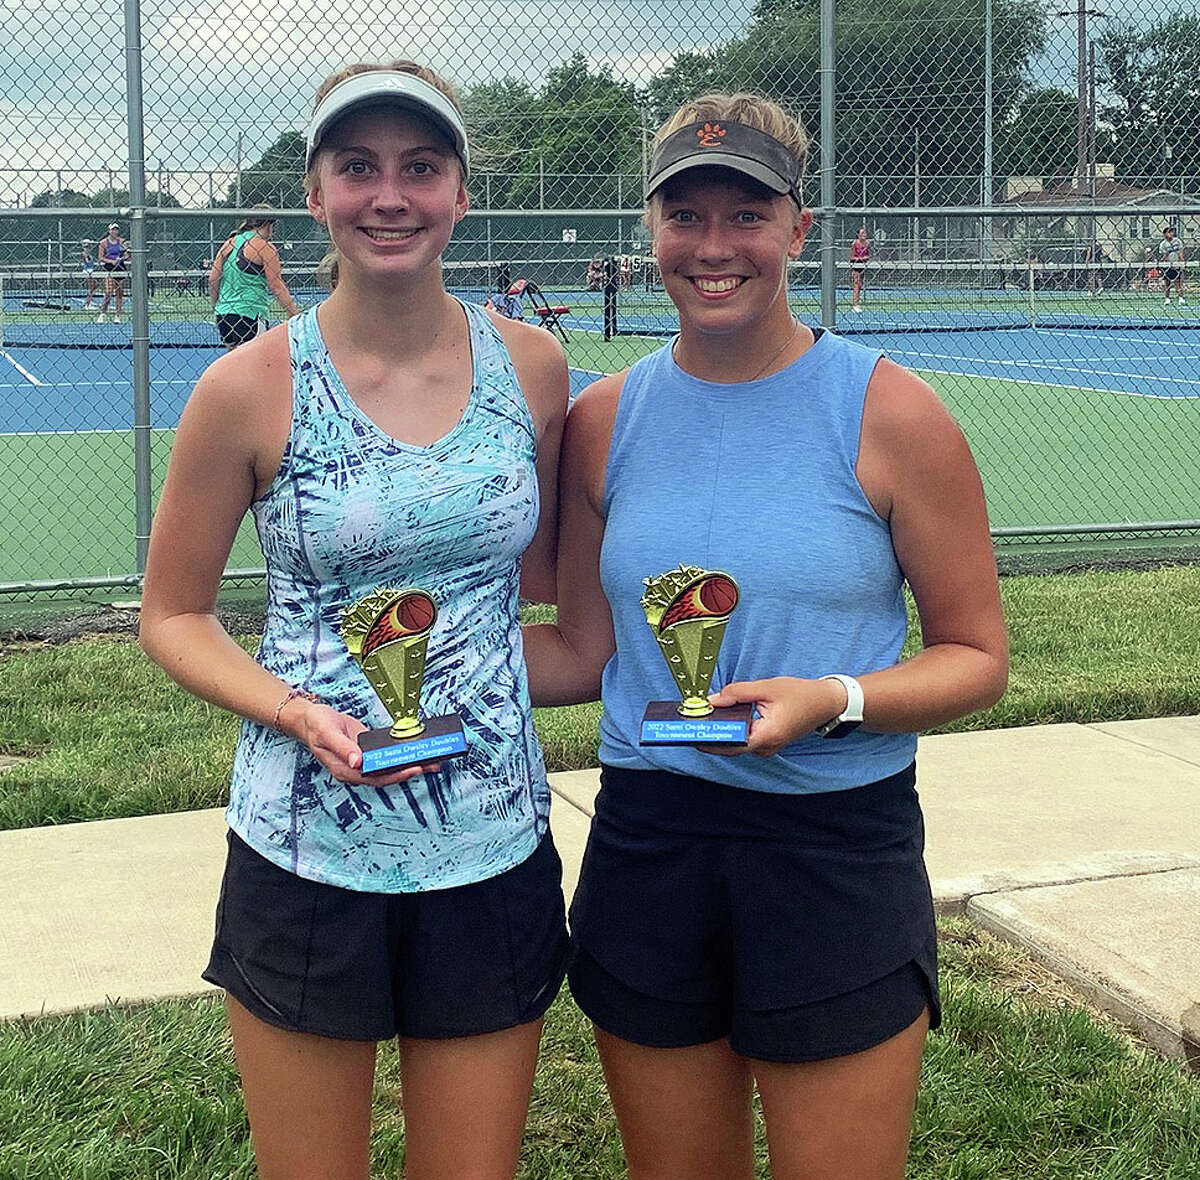 Women's open doubles champions Allysa Wise, left, and Hannah Colbert  pose after their 6-2, 6-1 win over Callahan Adams and Sarah Kreutztrager Saturday at the Sami Owsley Memorial Tennis Tournament at Roxana High School.